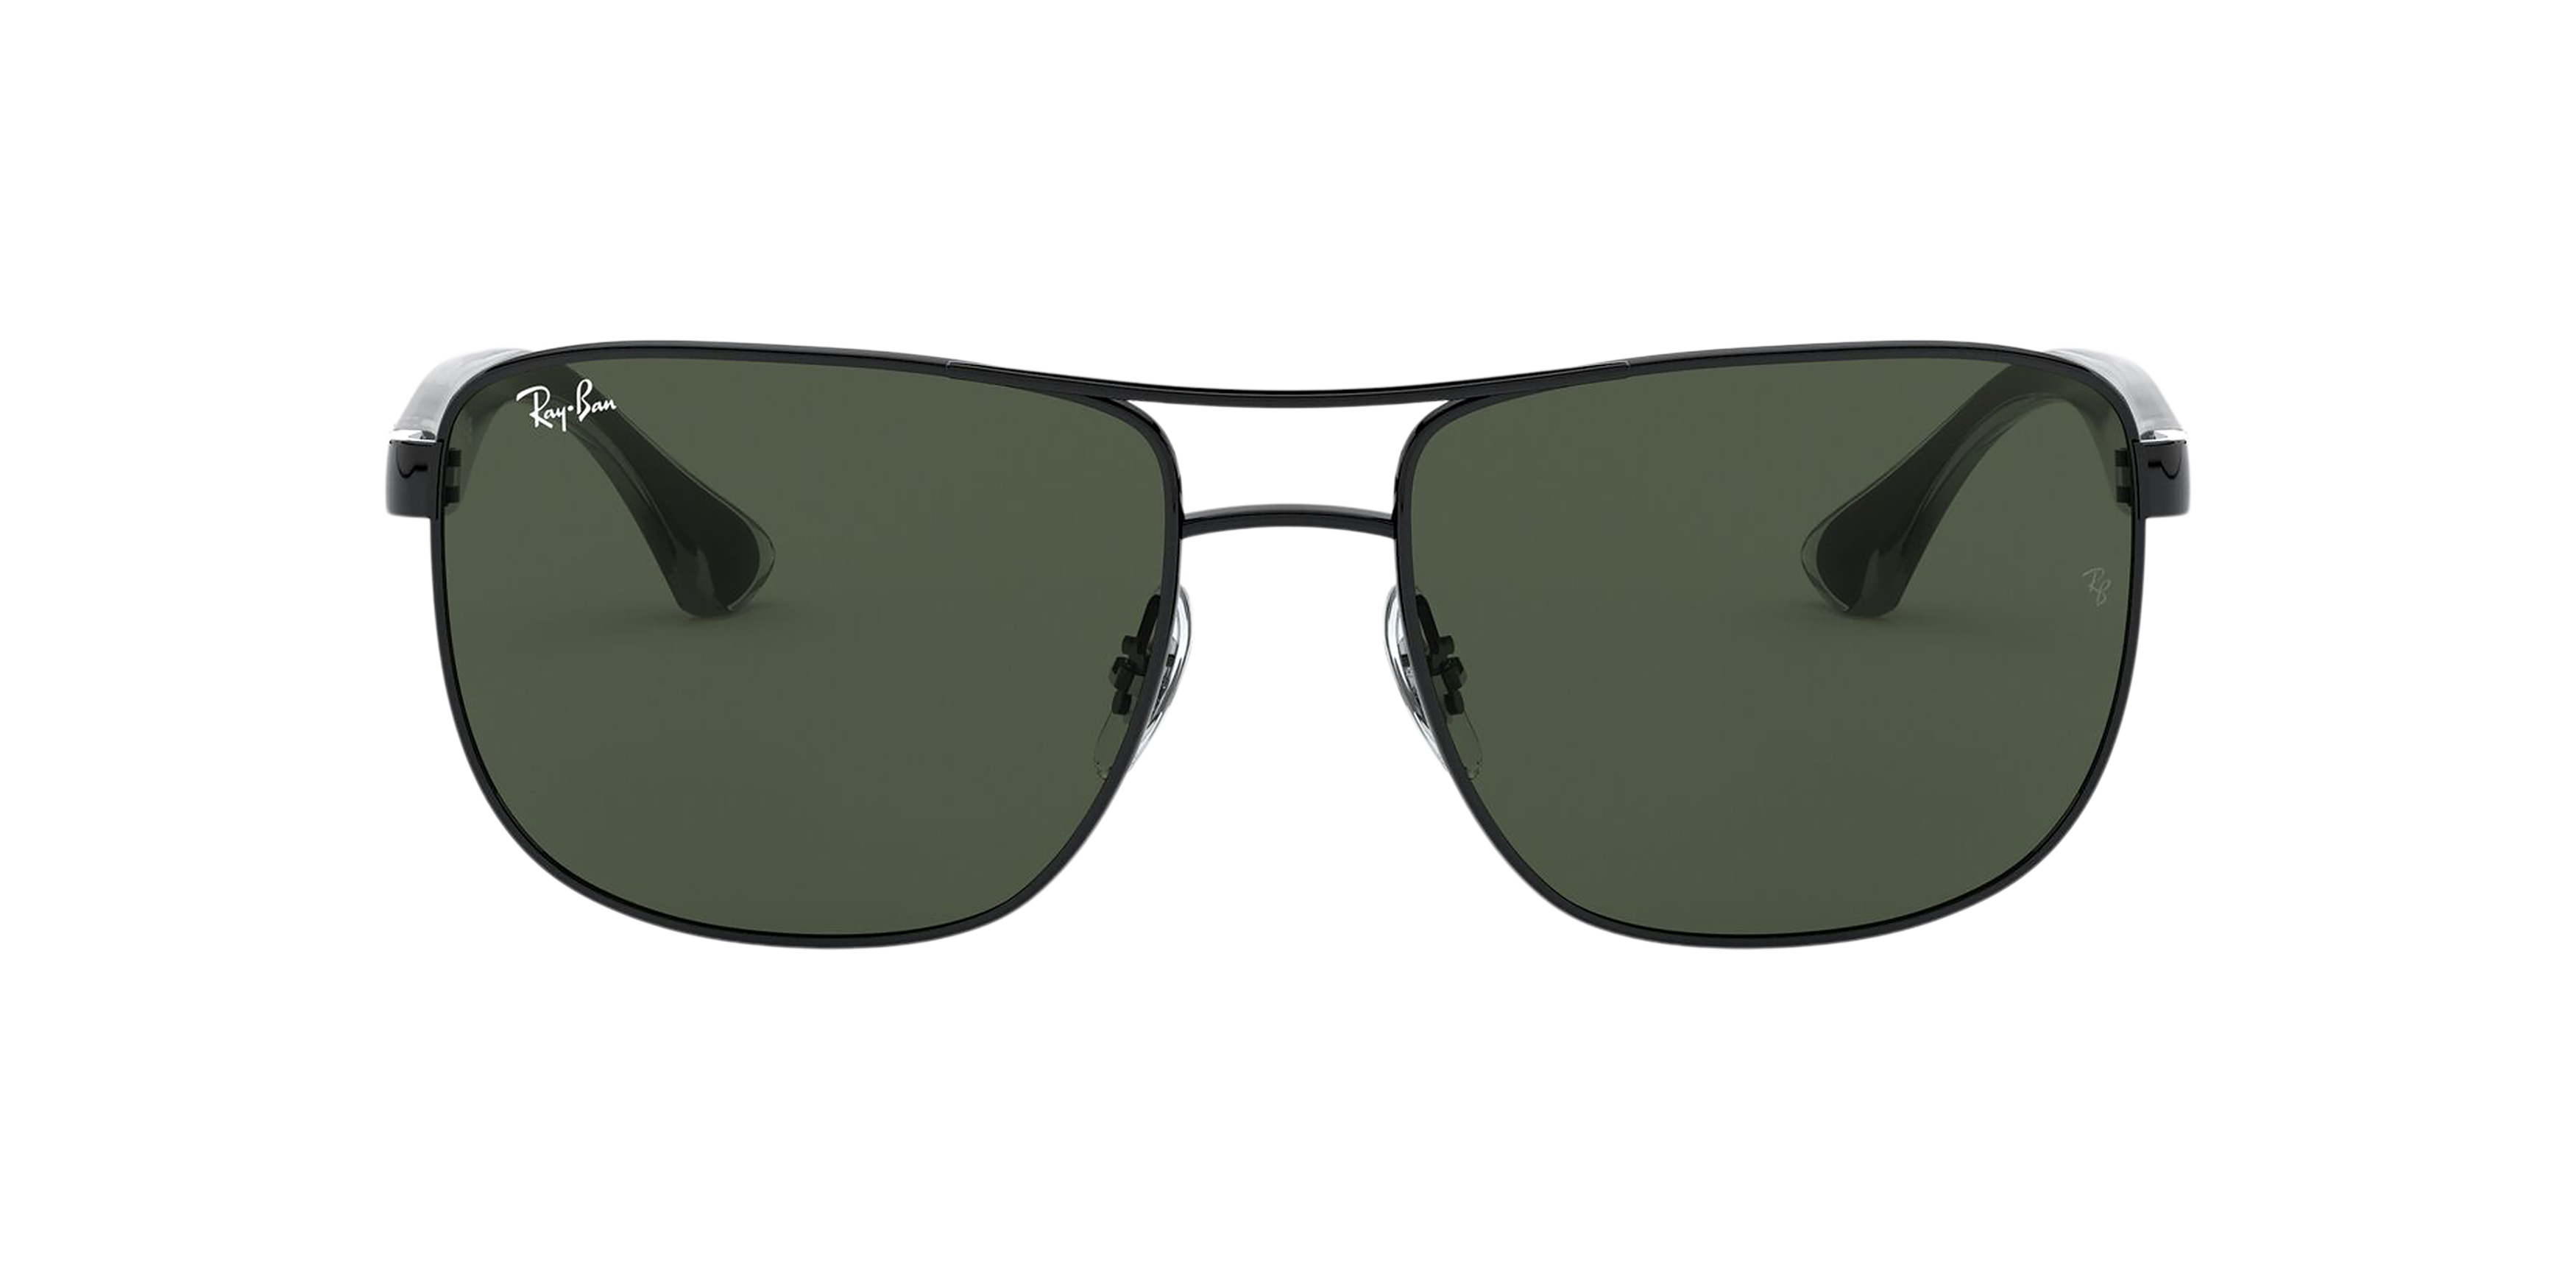 [products.image.front] Ray-Ban RB3533 002/71